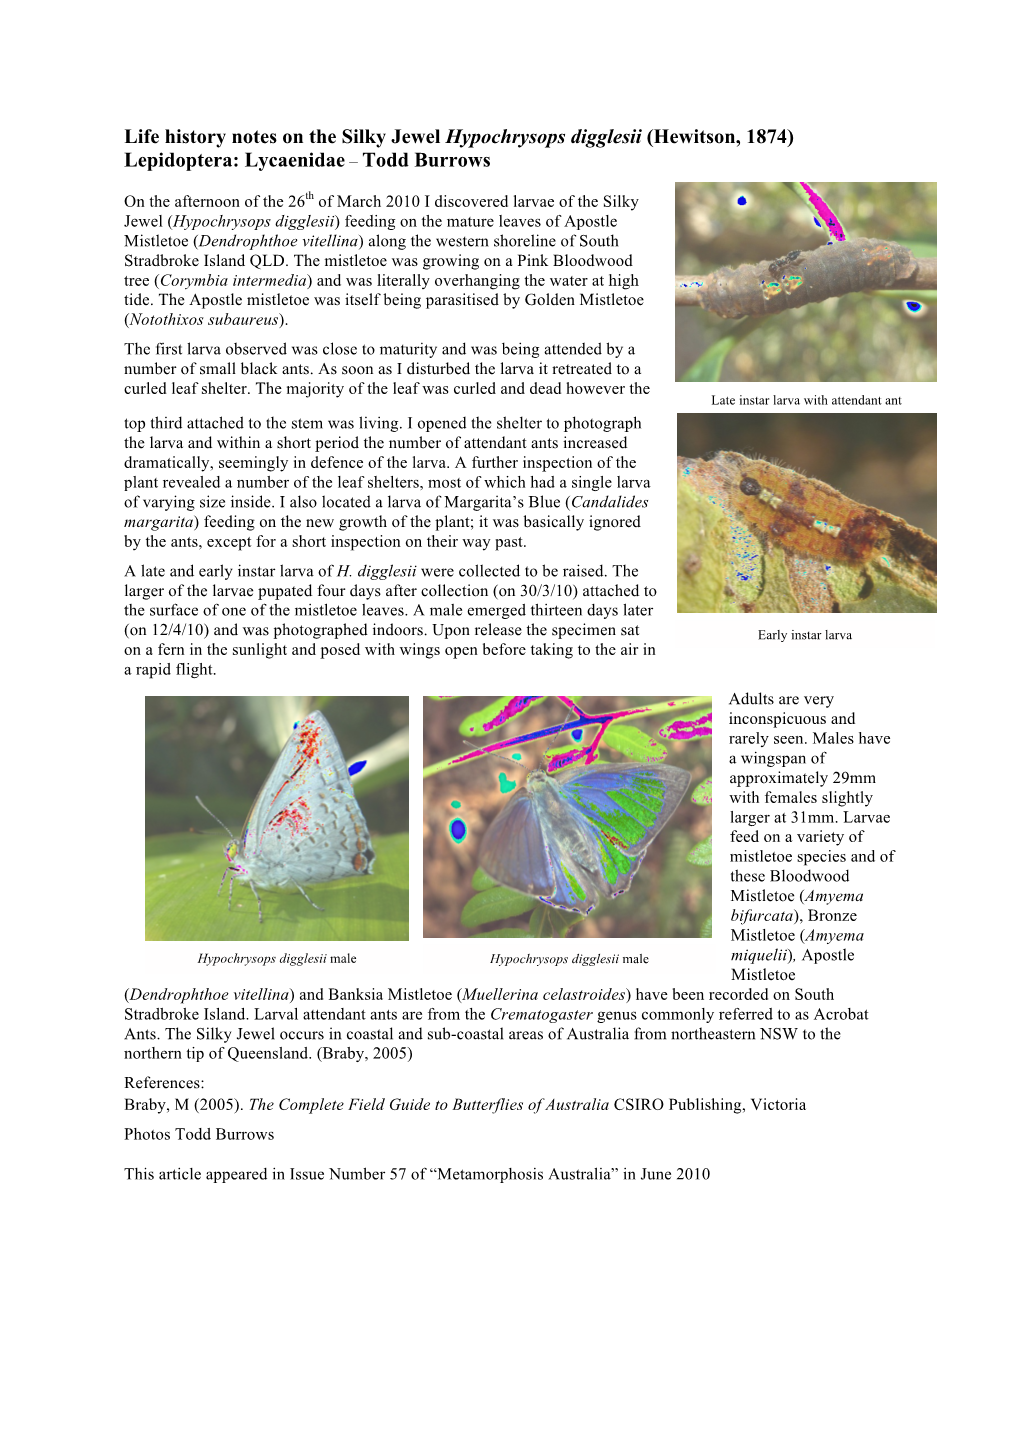 Life History Notes on the Silky Jewel Hypochrysops Digglesii (Hewitson, 1874) Lepidoptera: Lycaenidae – Todd Burrows